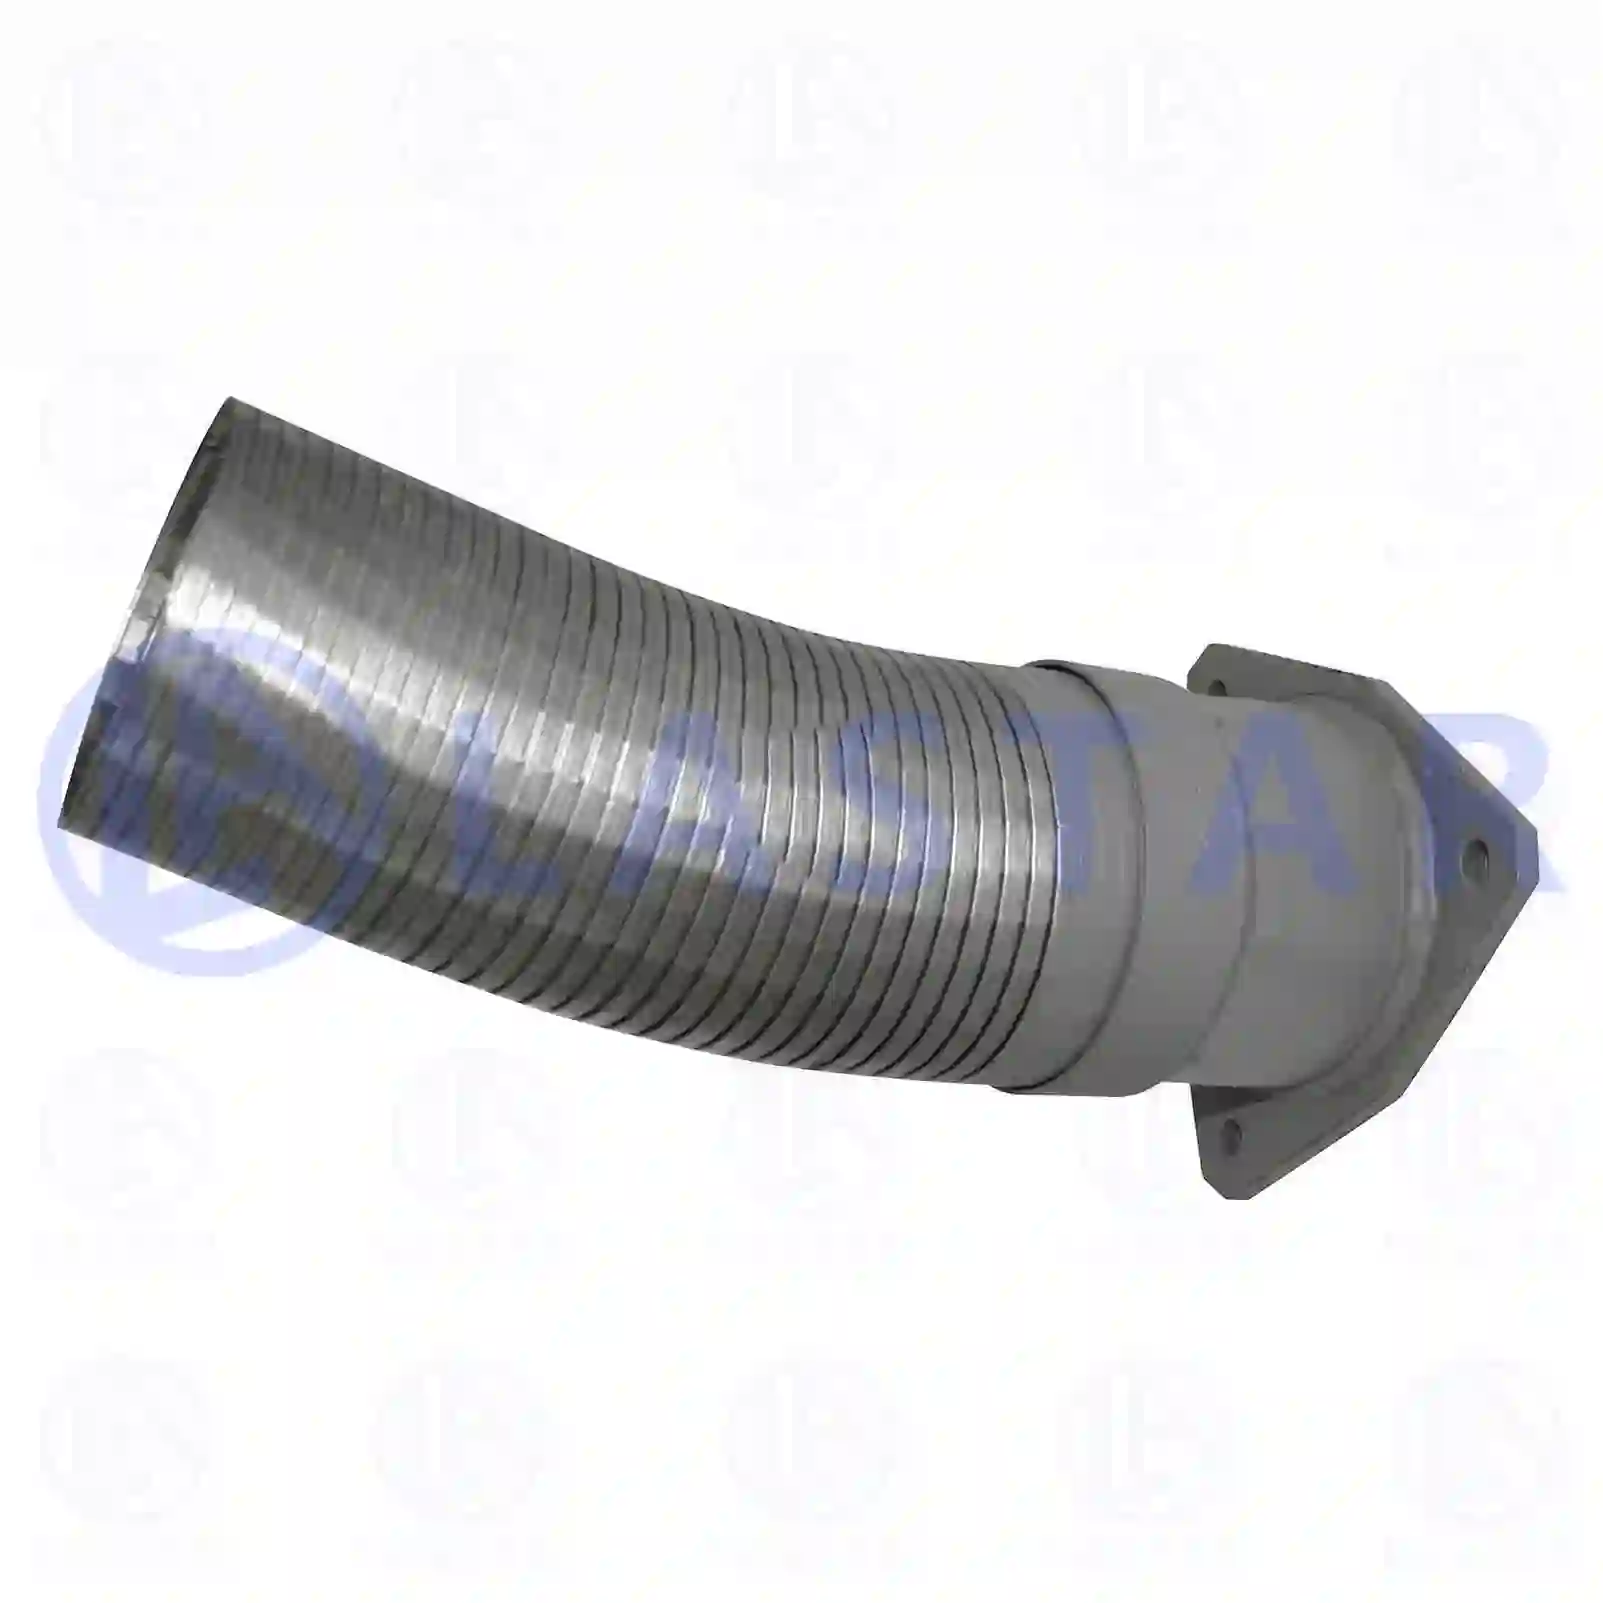 Front exhaust pipe, 77706481, 1301657, 1327817, 1333157 ||  77706481 Lastar Spare Part | Truck Spare Parts, Auotomotive Spare Parts Front exhaust pipe, 77706481, 1301657, 1327817, 1333157 ||  77706481 Lastar Spare Part | Truck Spare Parts, Auotomotive Spare Parts